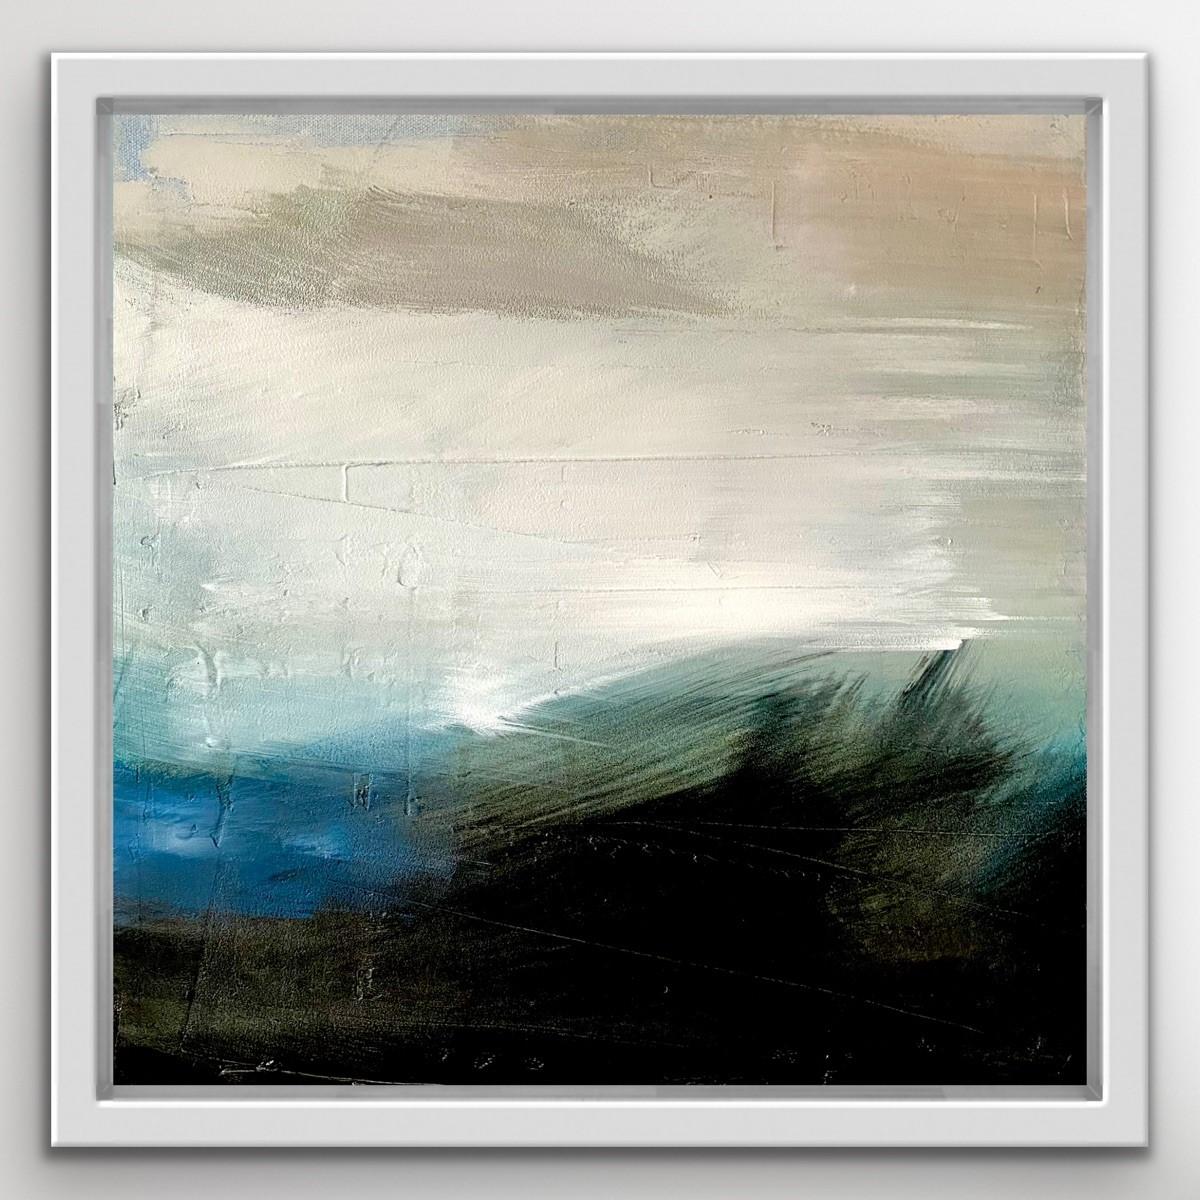 Black Edge - Painting by Clare Millen